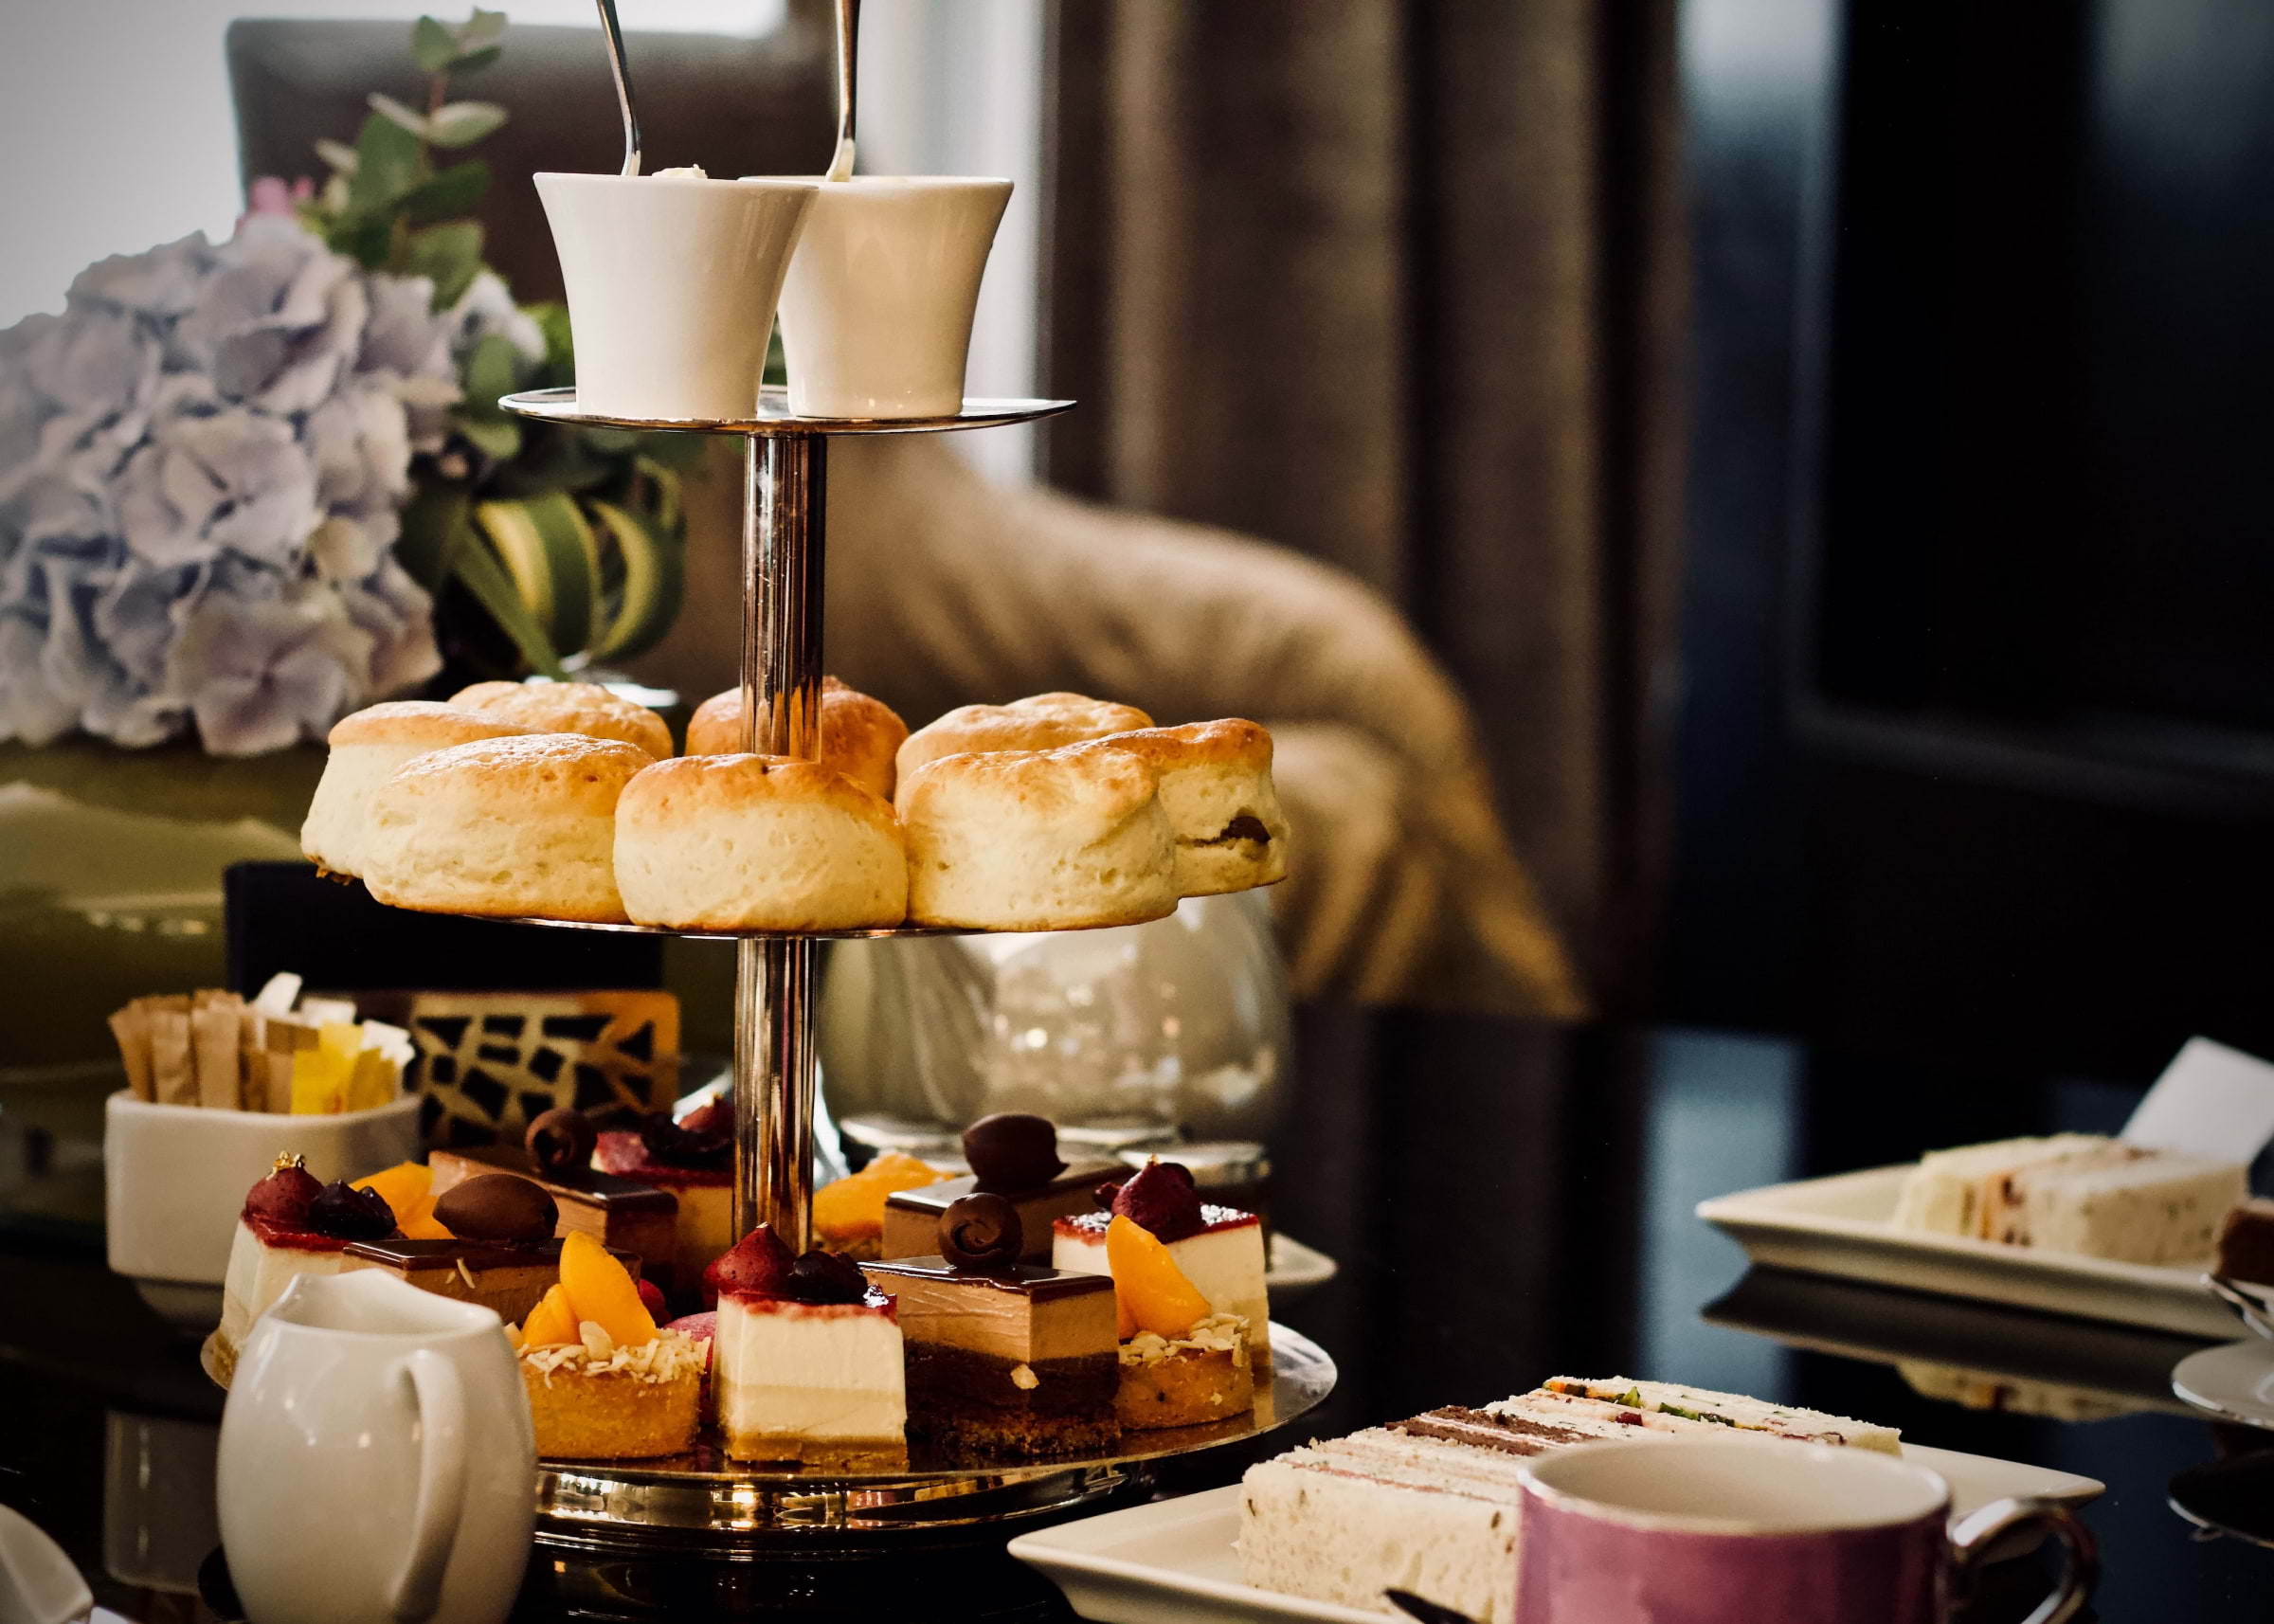 Guide to affordable afternoon tea in London